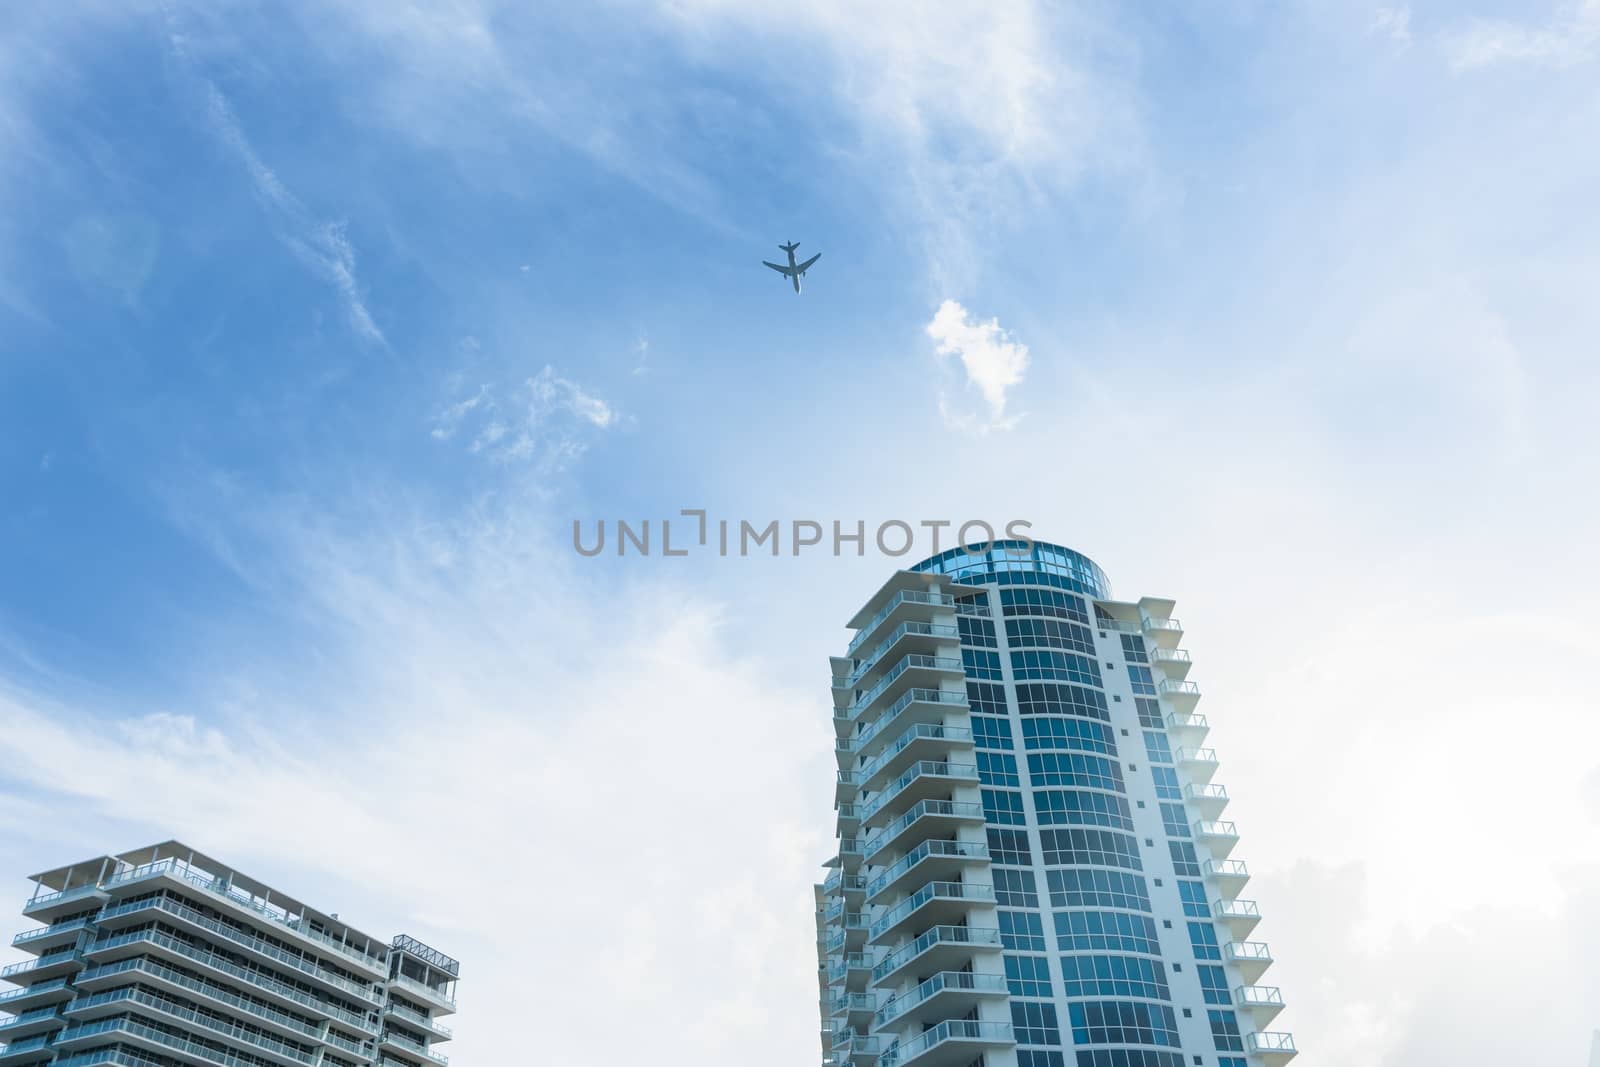 High-rise apartment buildings with passenger plane flying past high above